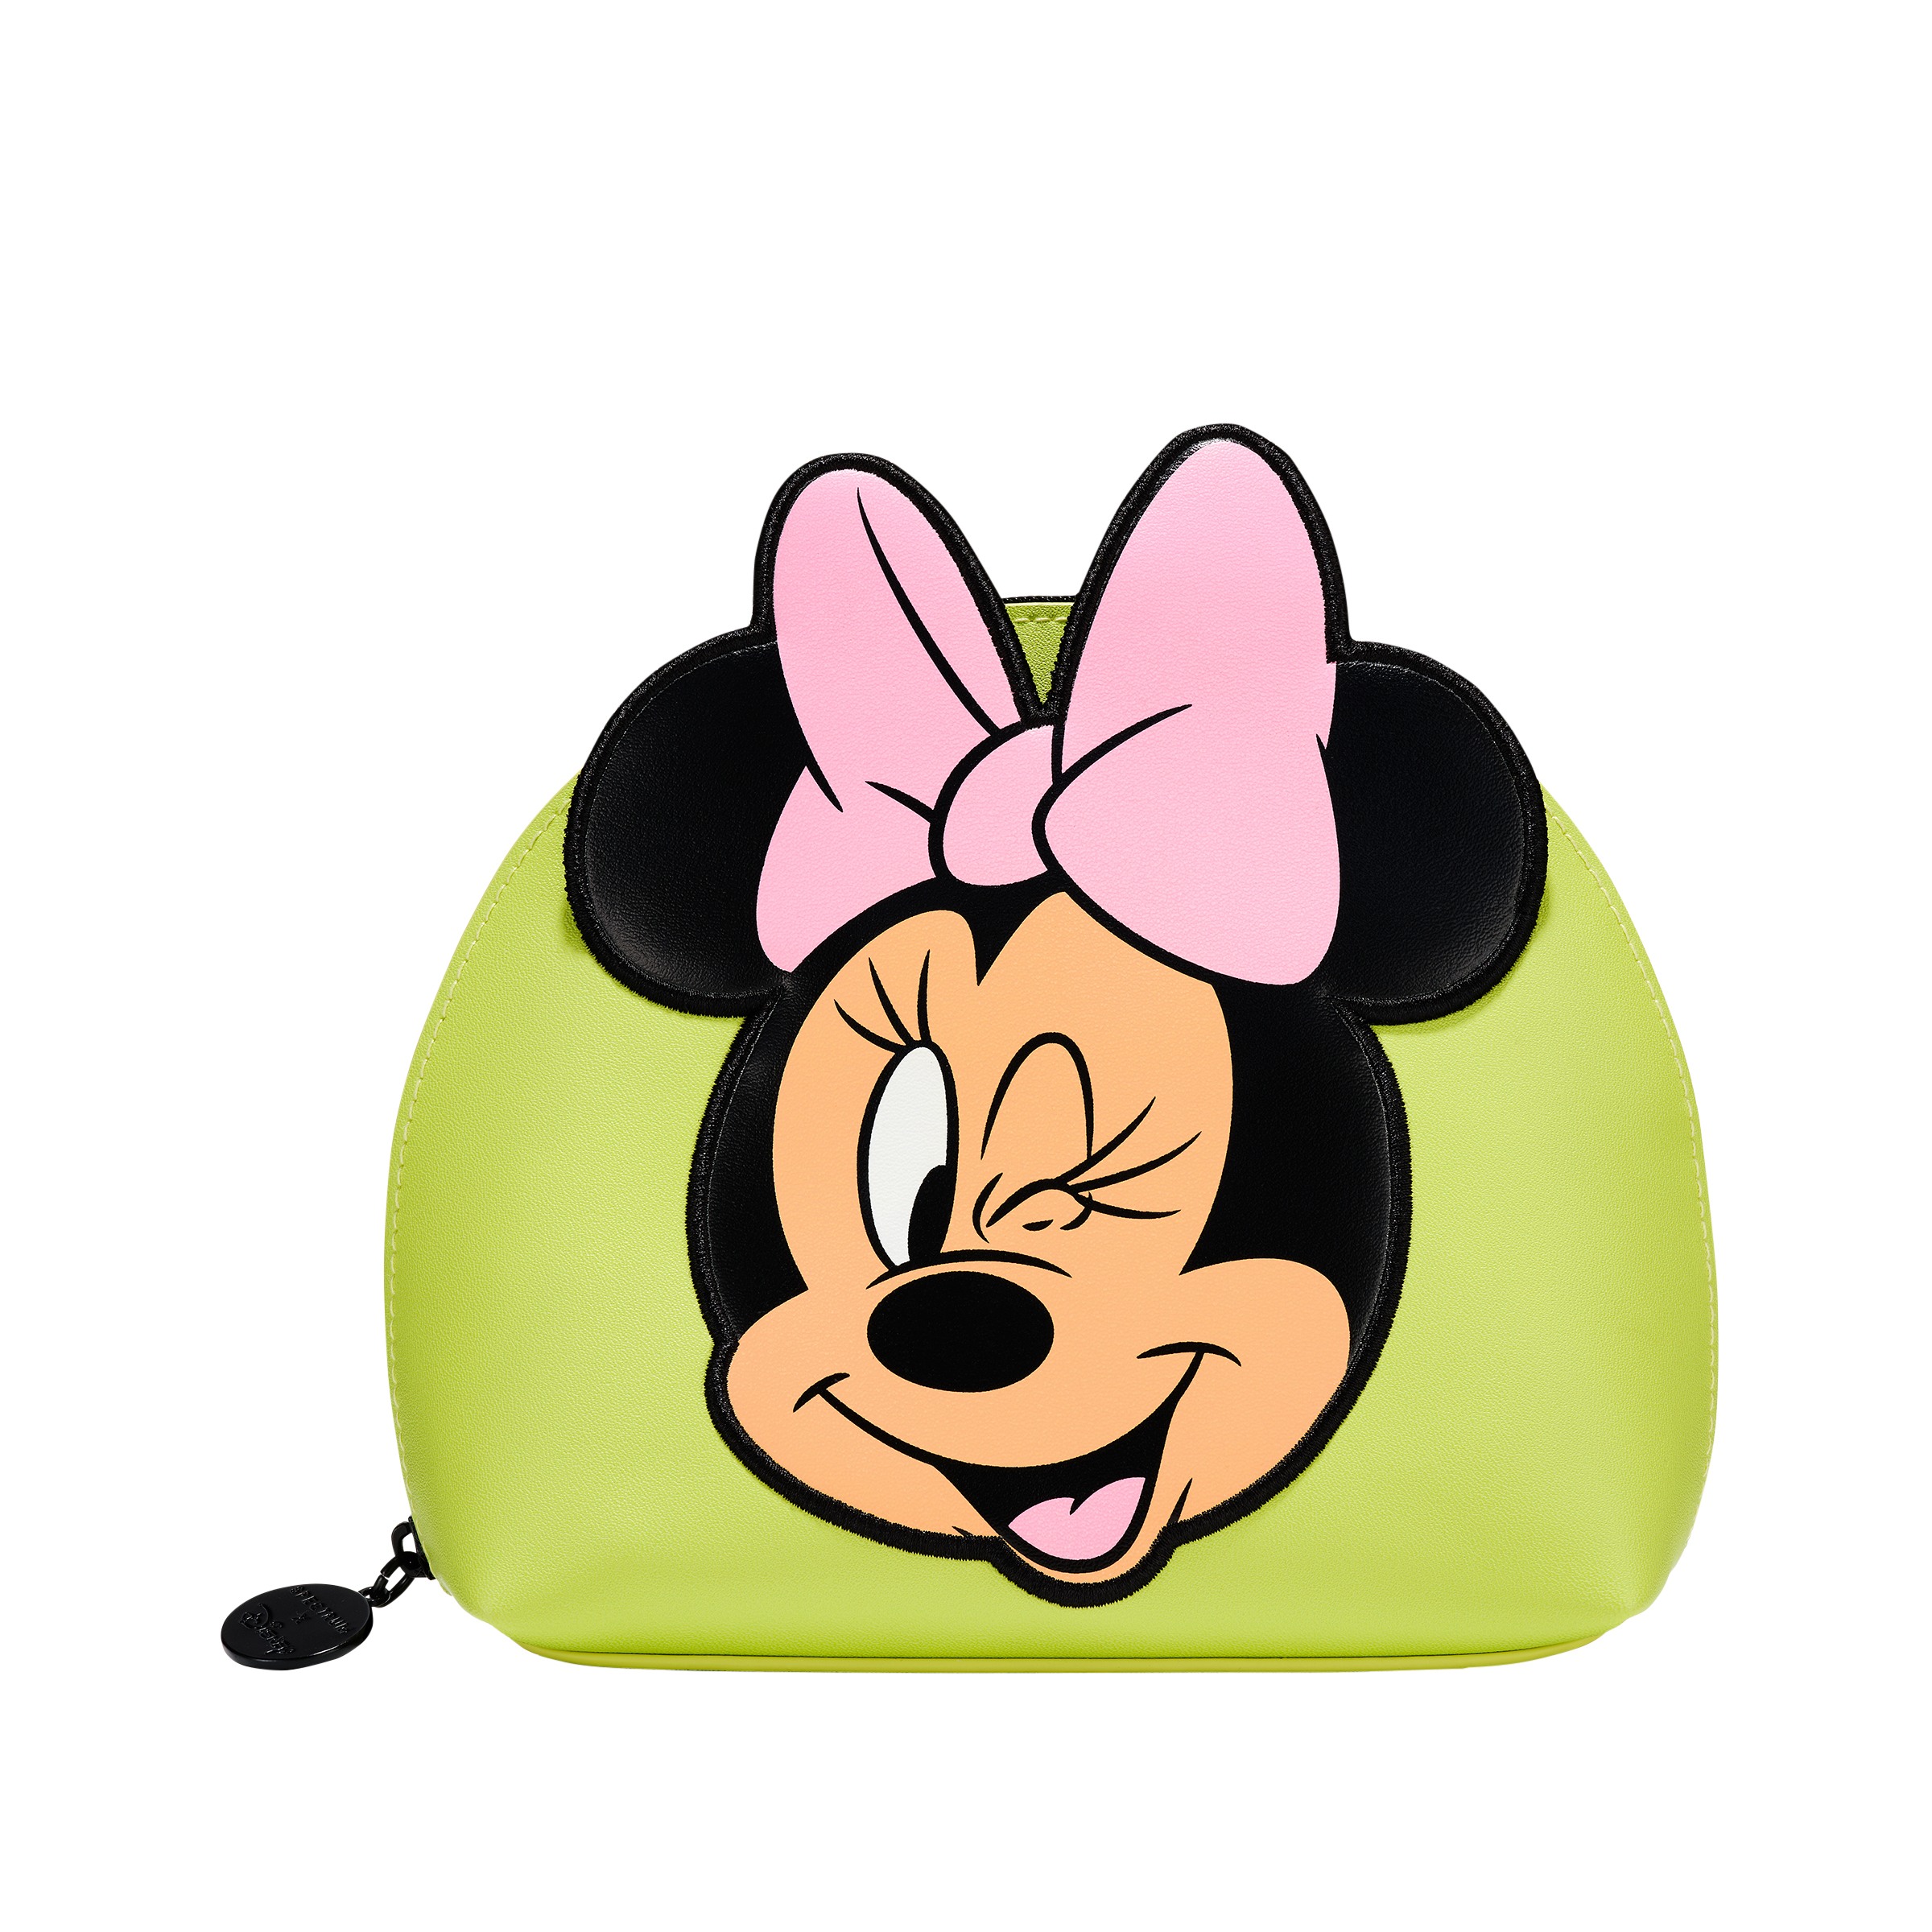 spectrum collections so much minnie makeup bag